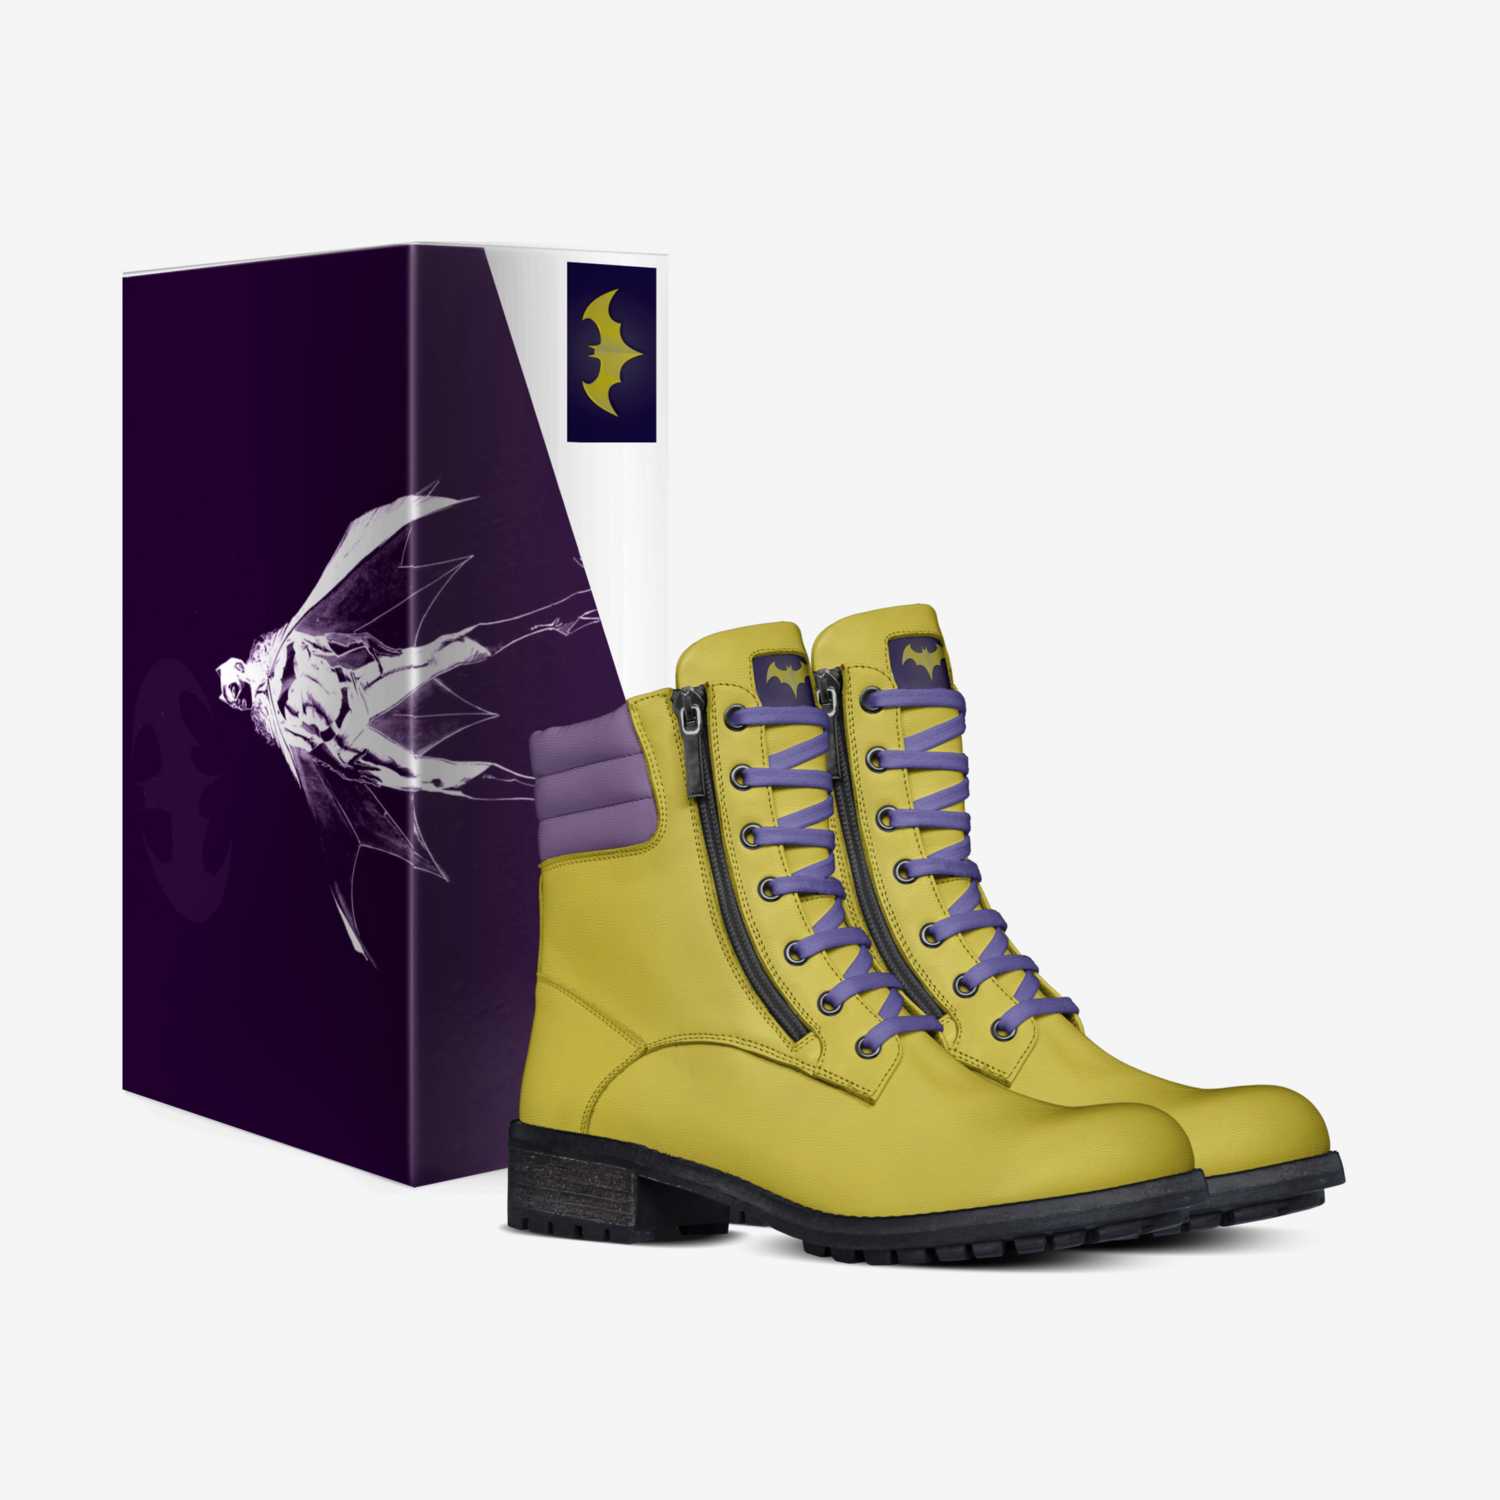 batgirl custom made in Italy shoes by Issa Dadivas | Box view